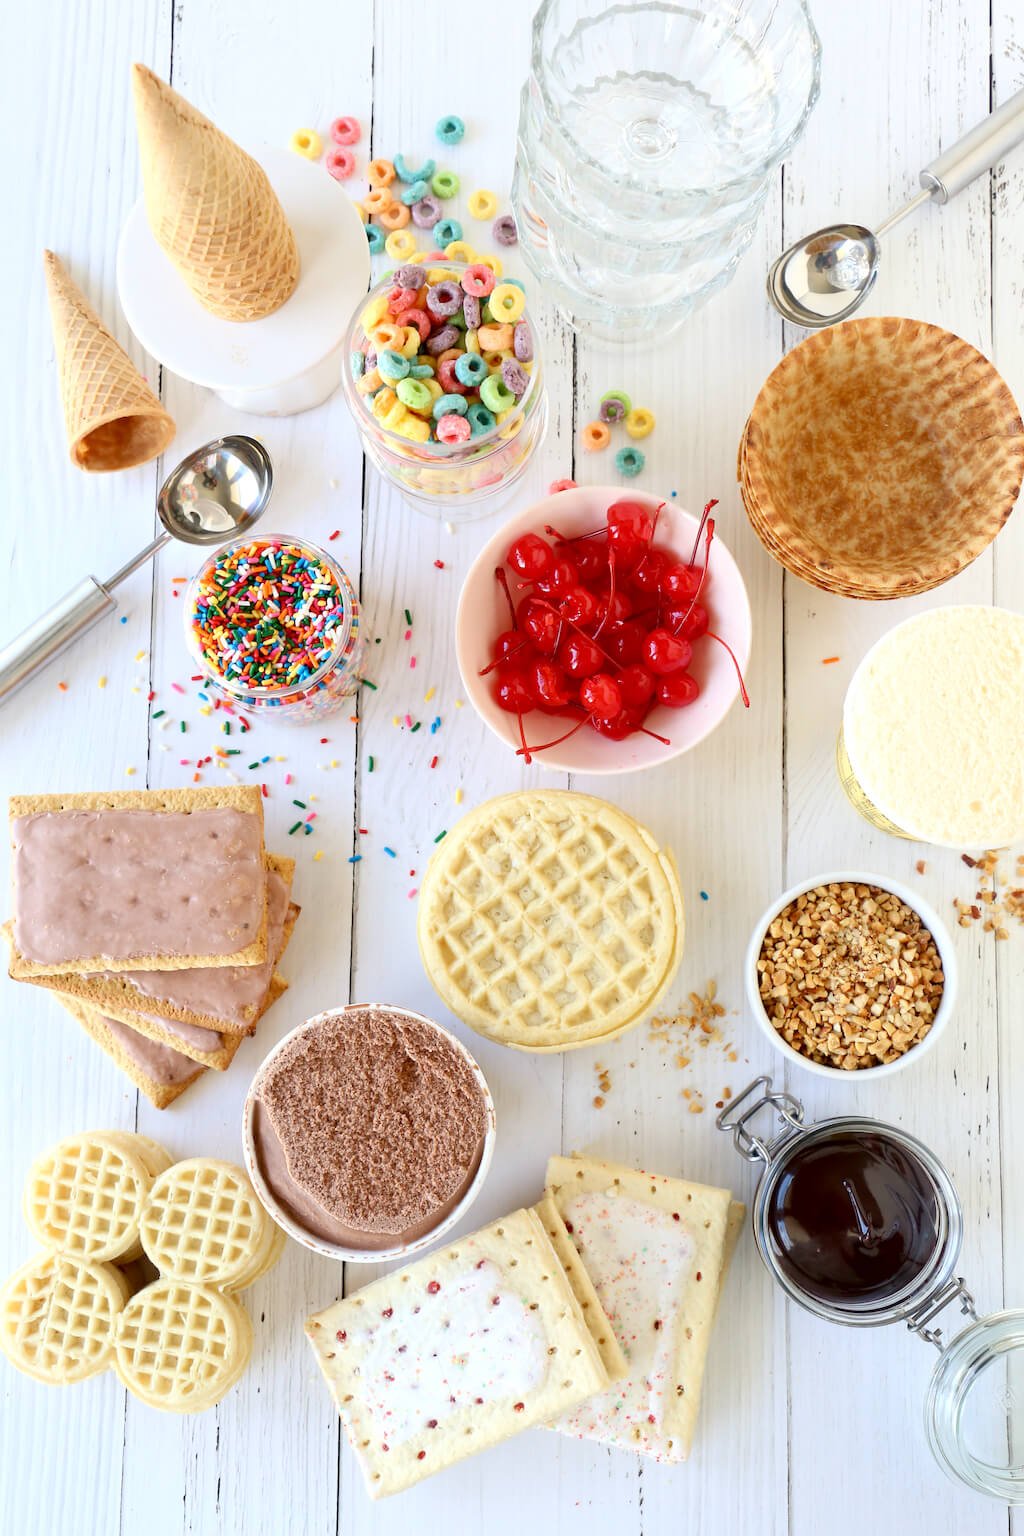 a spread of ice cream, waffles, pop tarts, cherries, cereal, ice cream cones and chocolate sauce